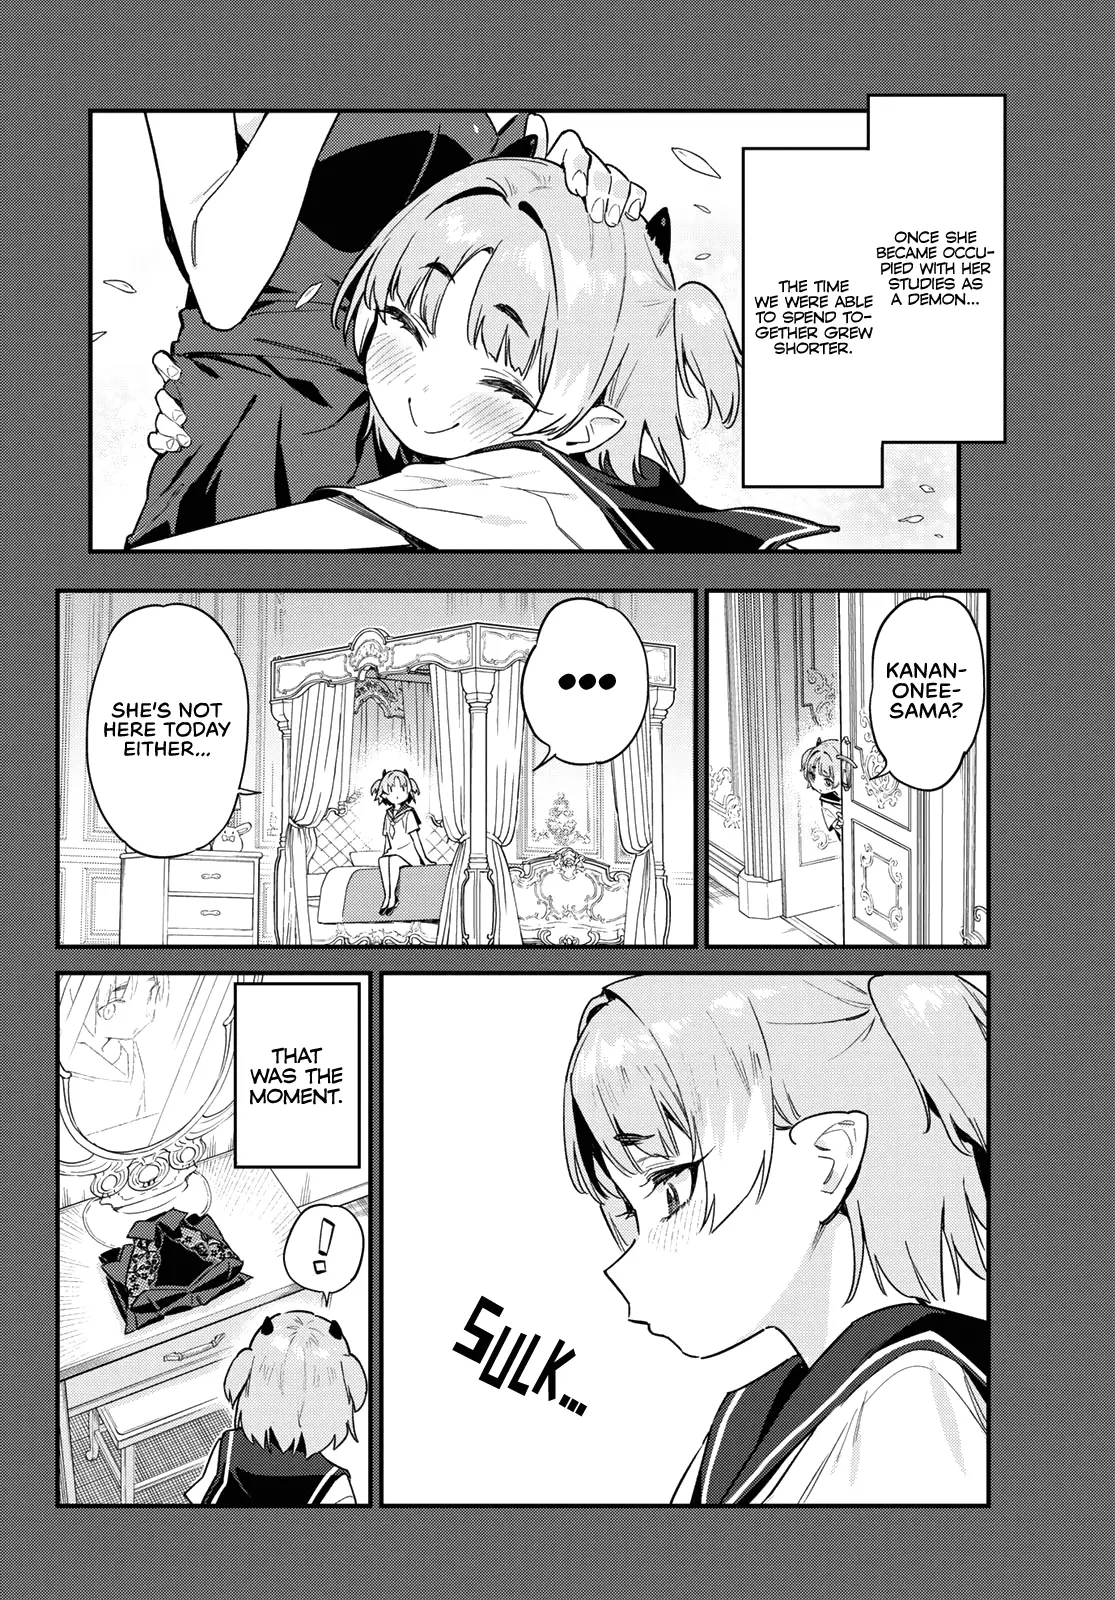 Kanan-Sama Is Easy As Hell! - 46 page 4-5462e18c